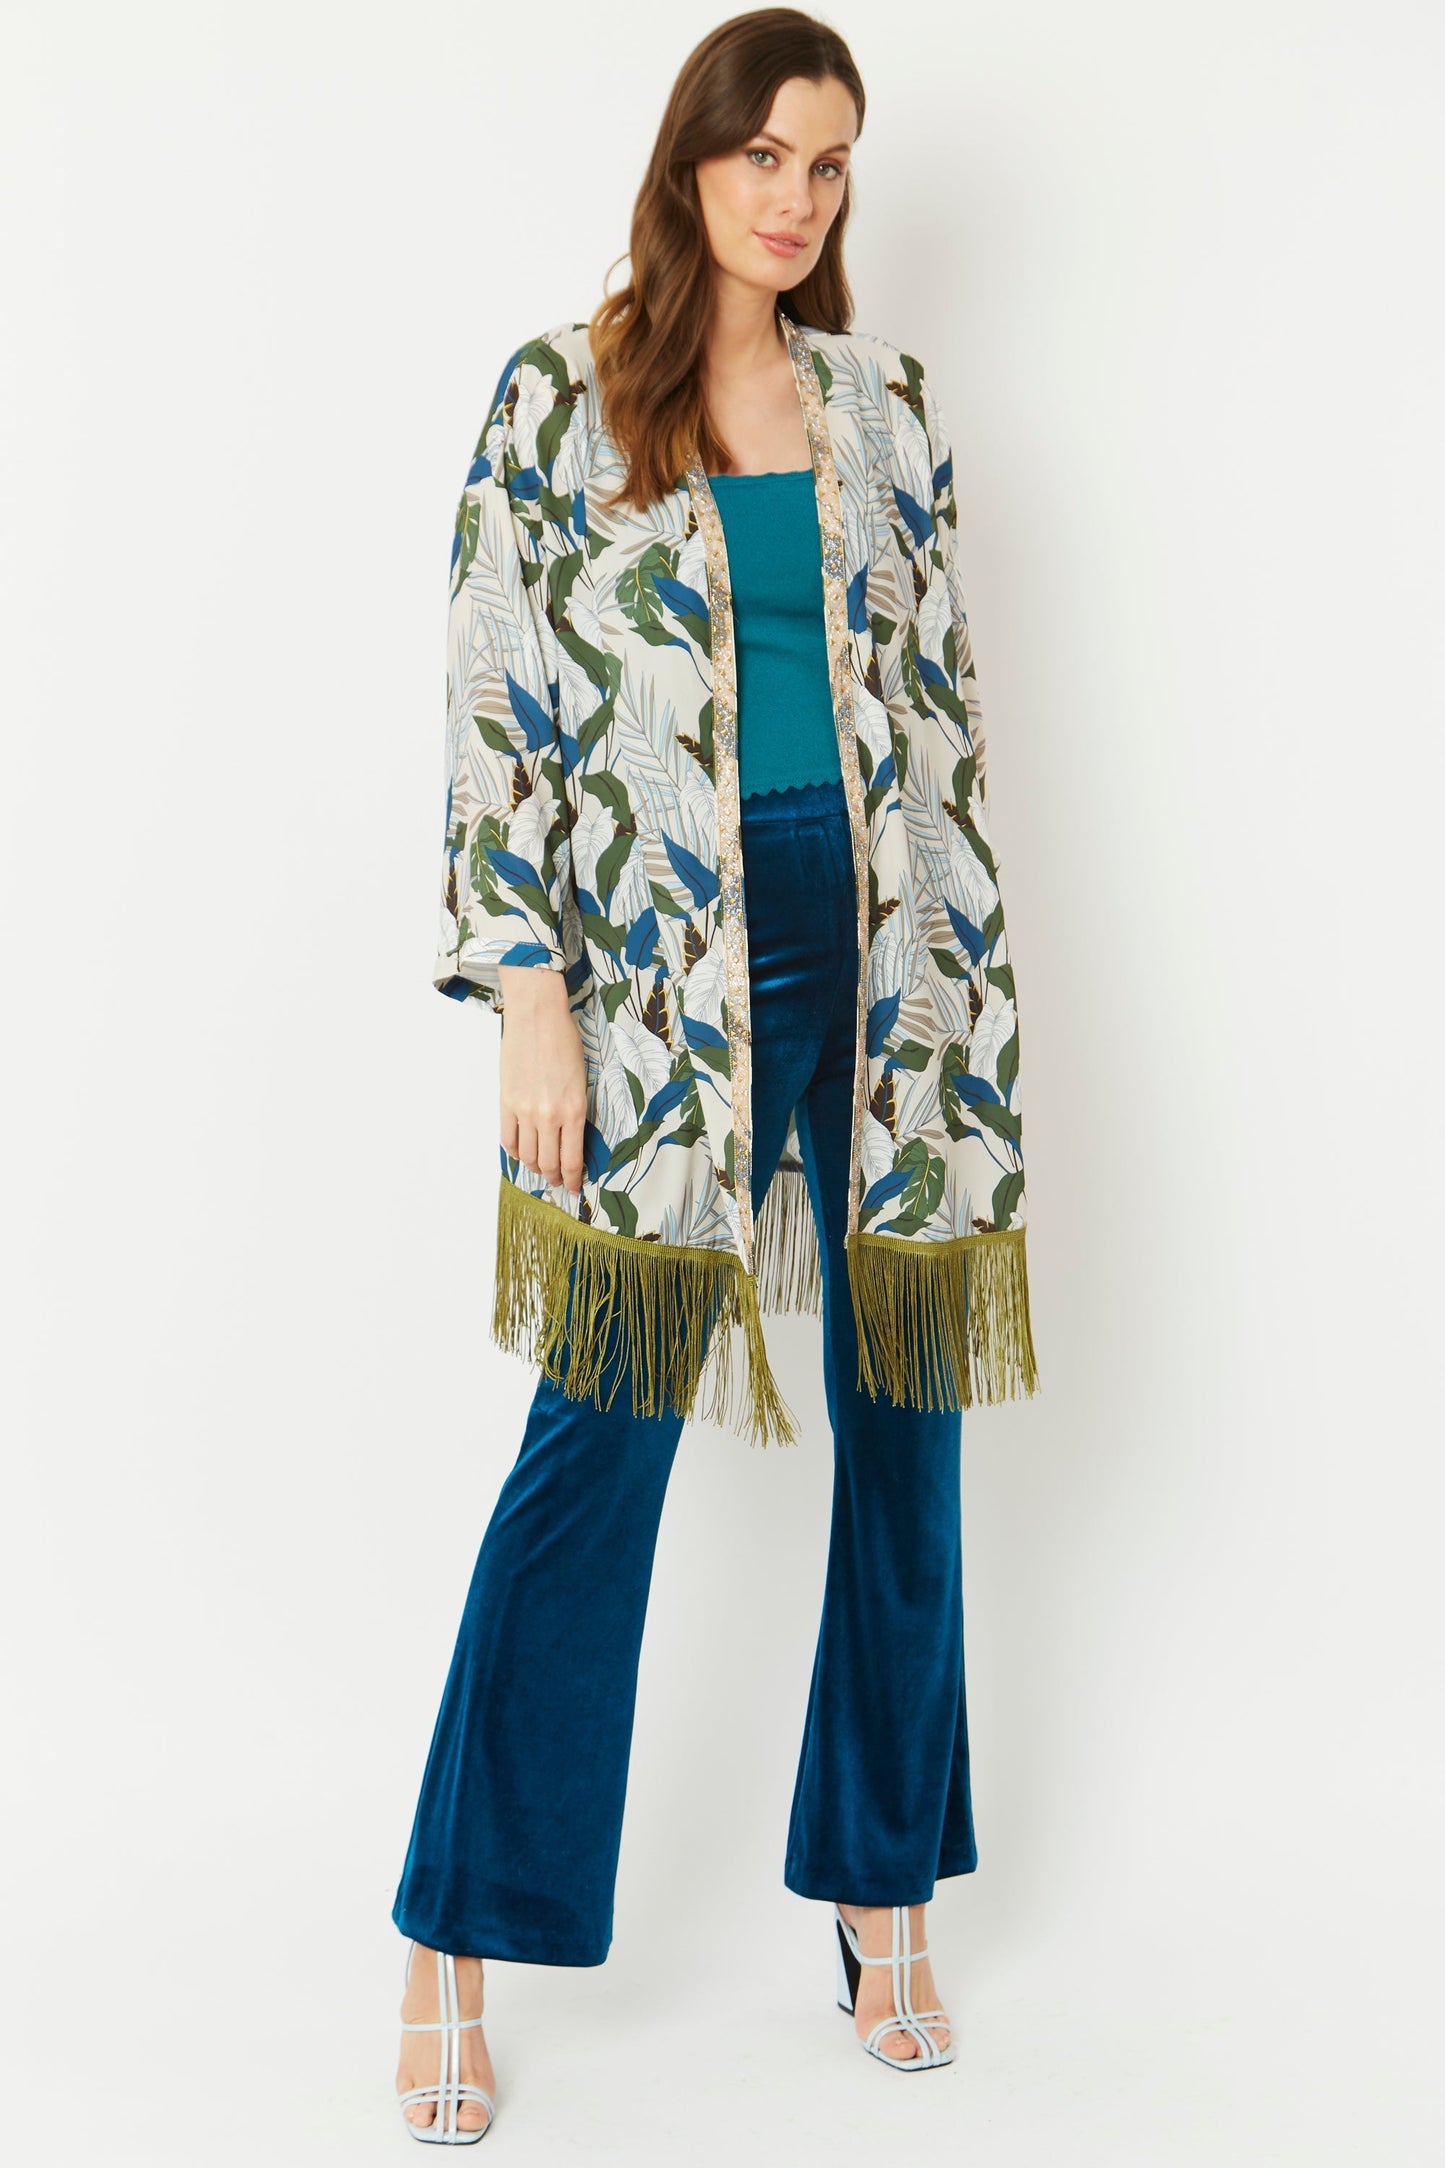 CYKM225A-07 - Silk Blend Kimono With Beaded Collar and Tassel Fringe